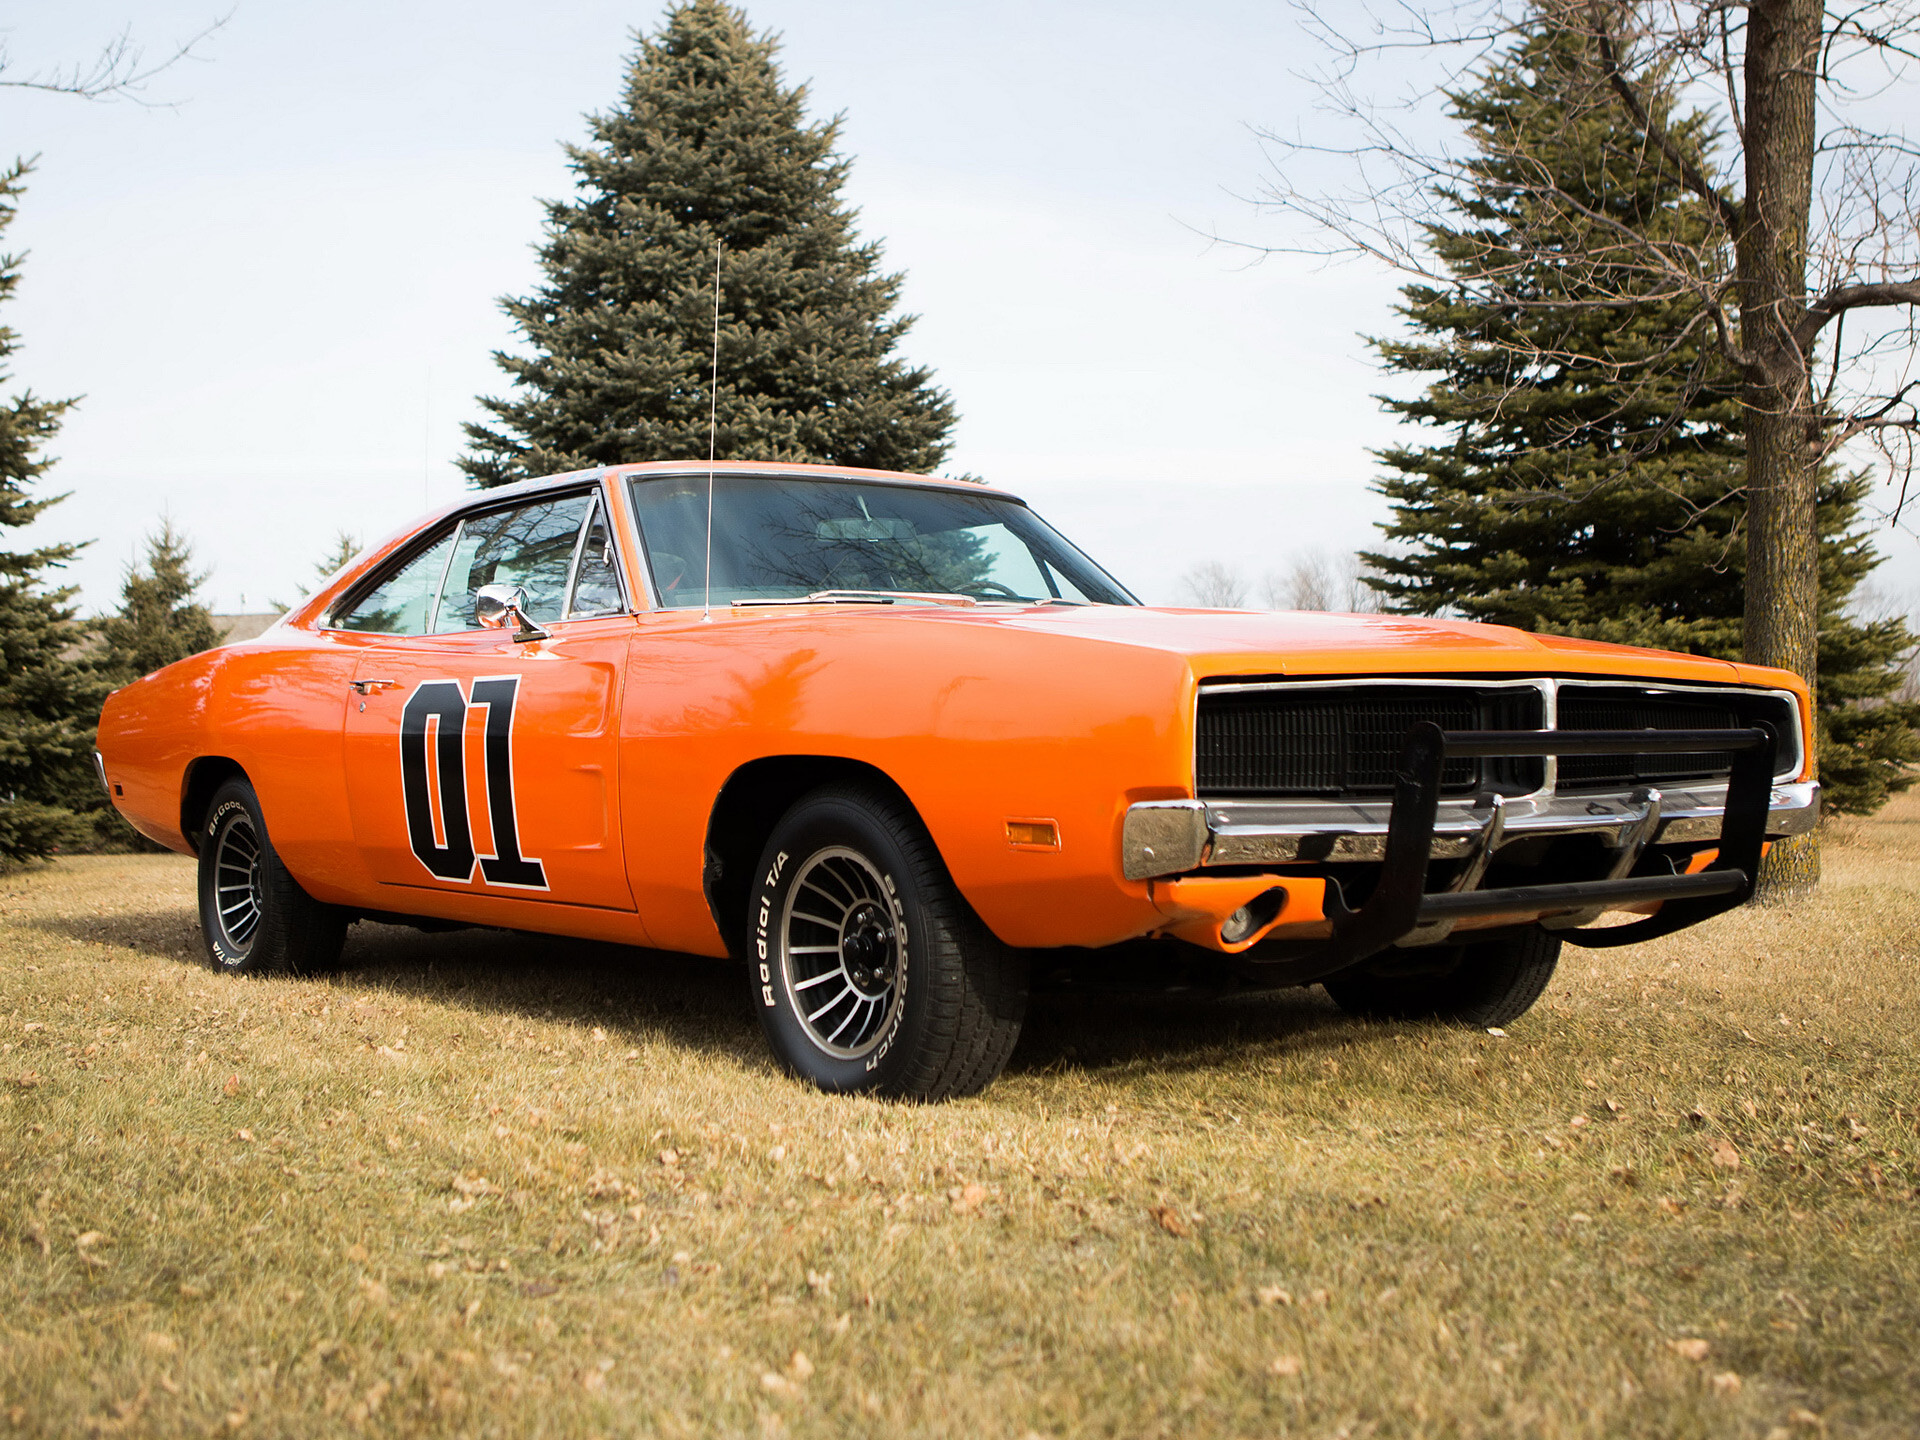 General Lee Car: The car made famous by the popular "Dukes of Hazzard" TV series, The first season of the CBS series. 1920x1440 HD Background.